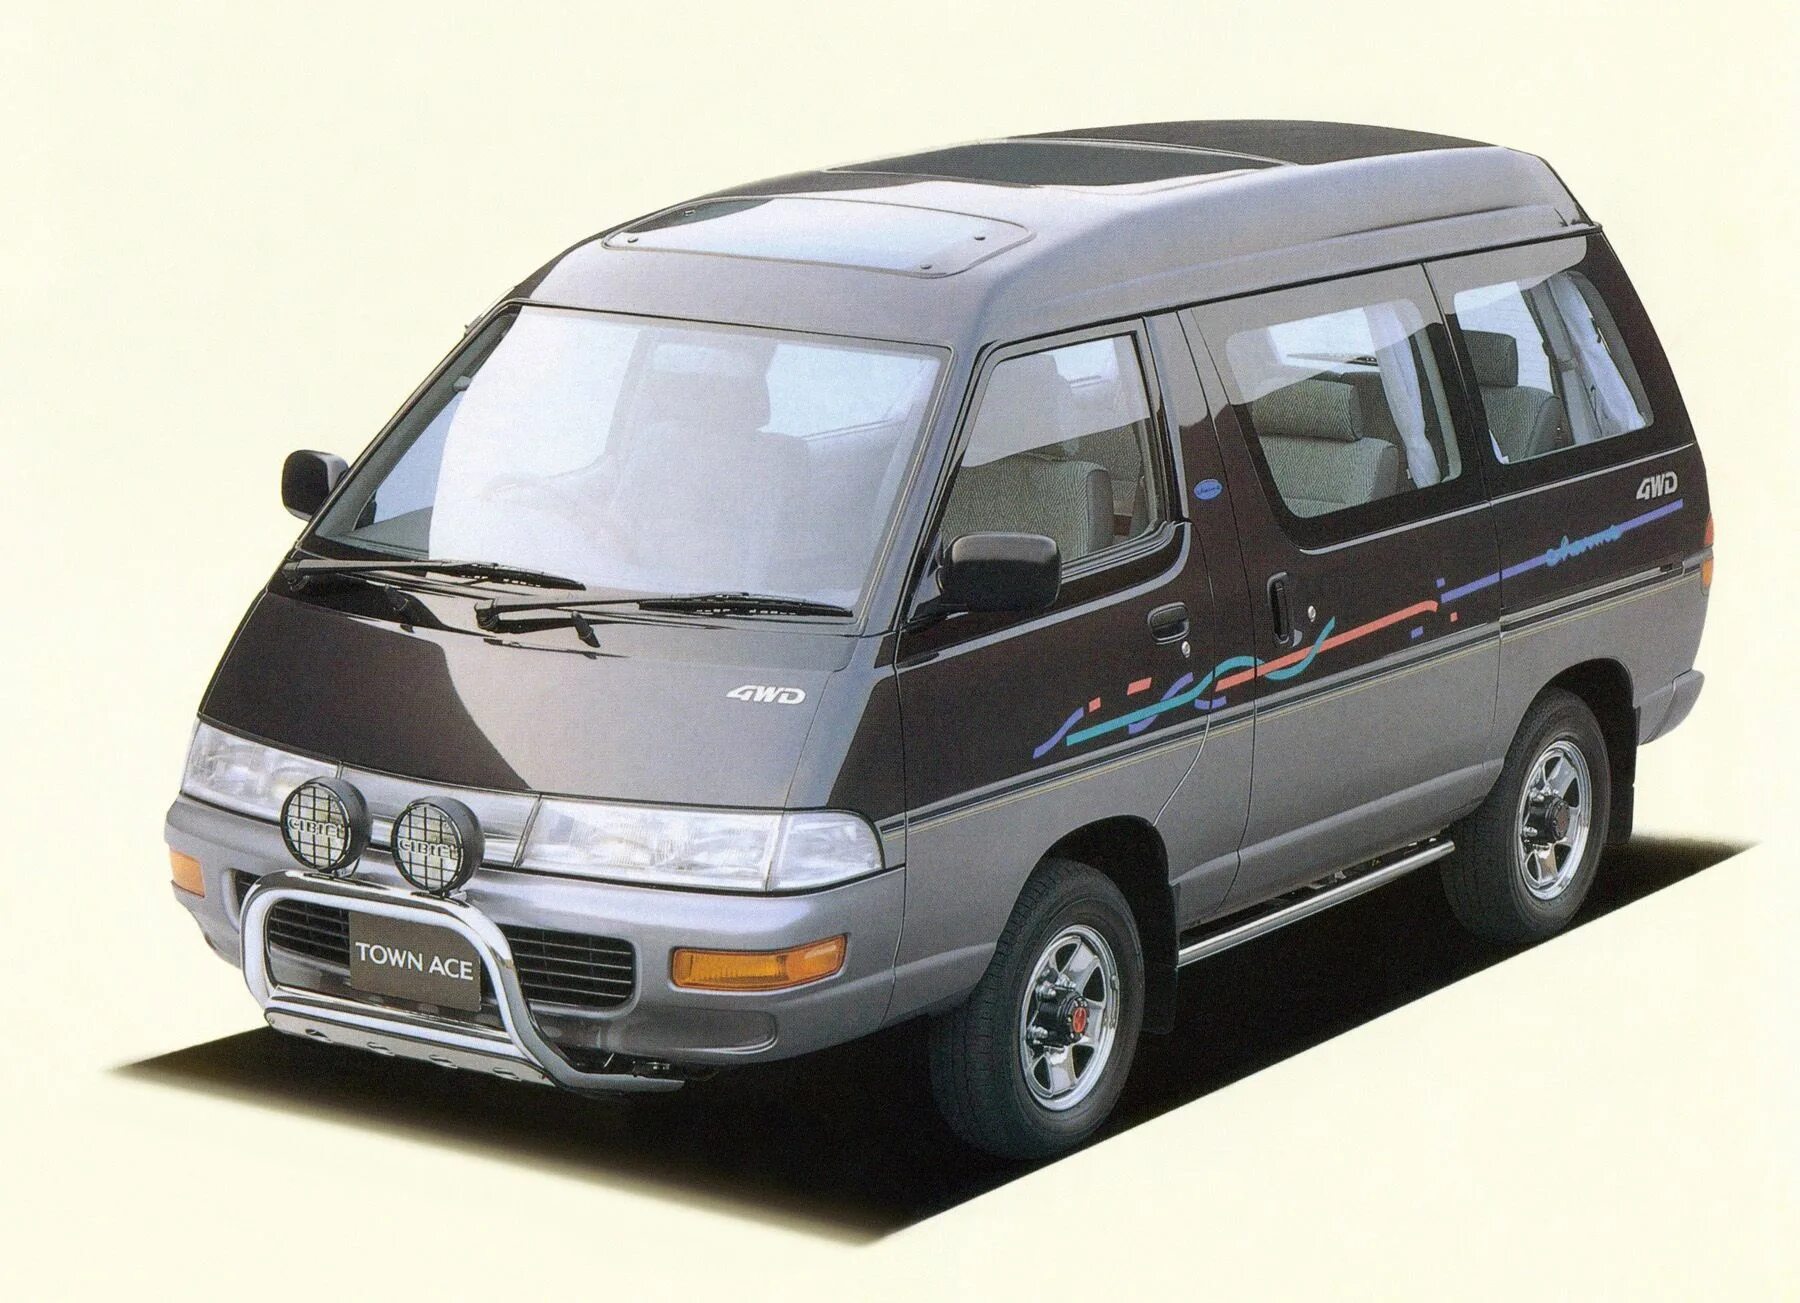 Toyota Town Ace 1992. Toyota Town Ace 1992-1996. Тойота Town Ace 1992. Toyota Town Ace 1996. Таун айс 1992